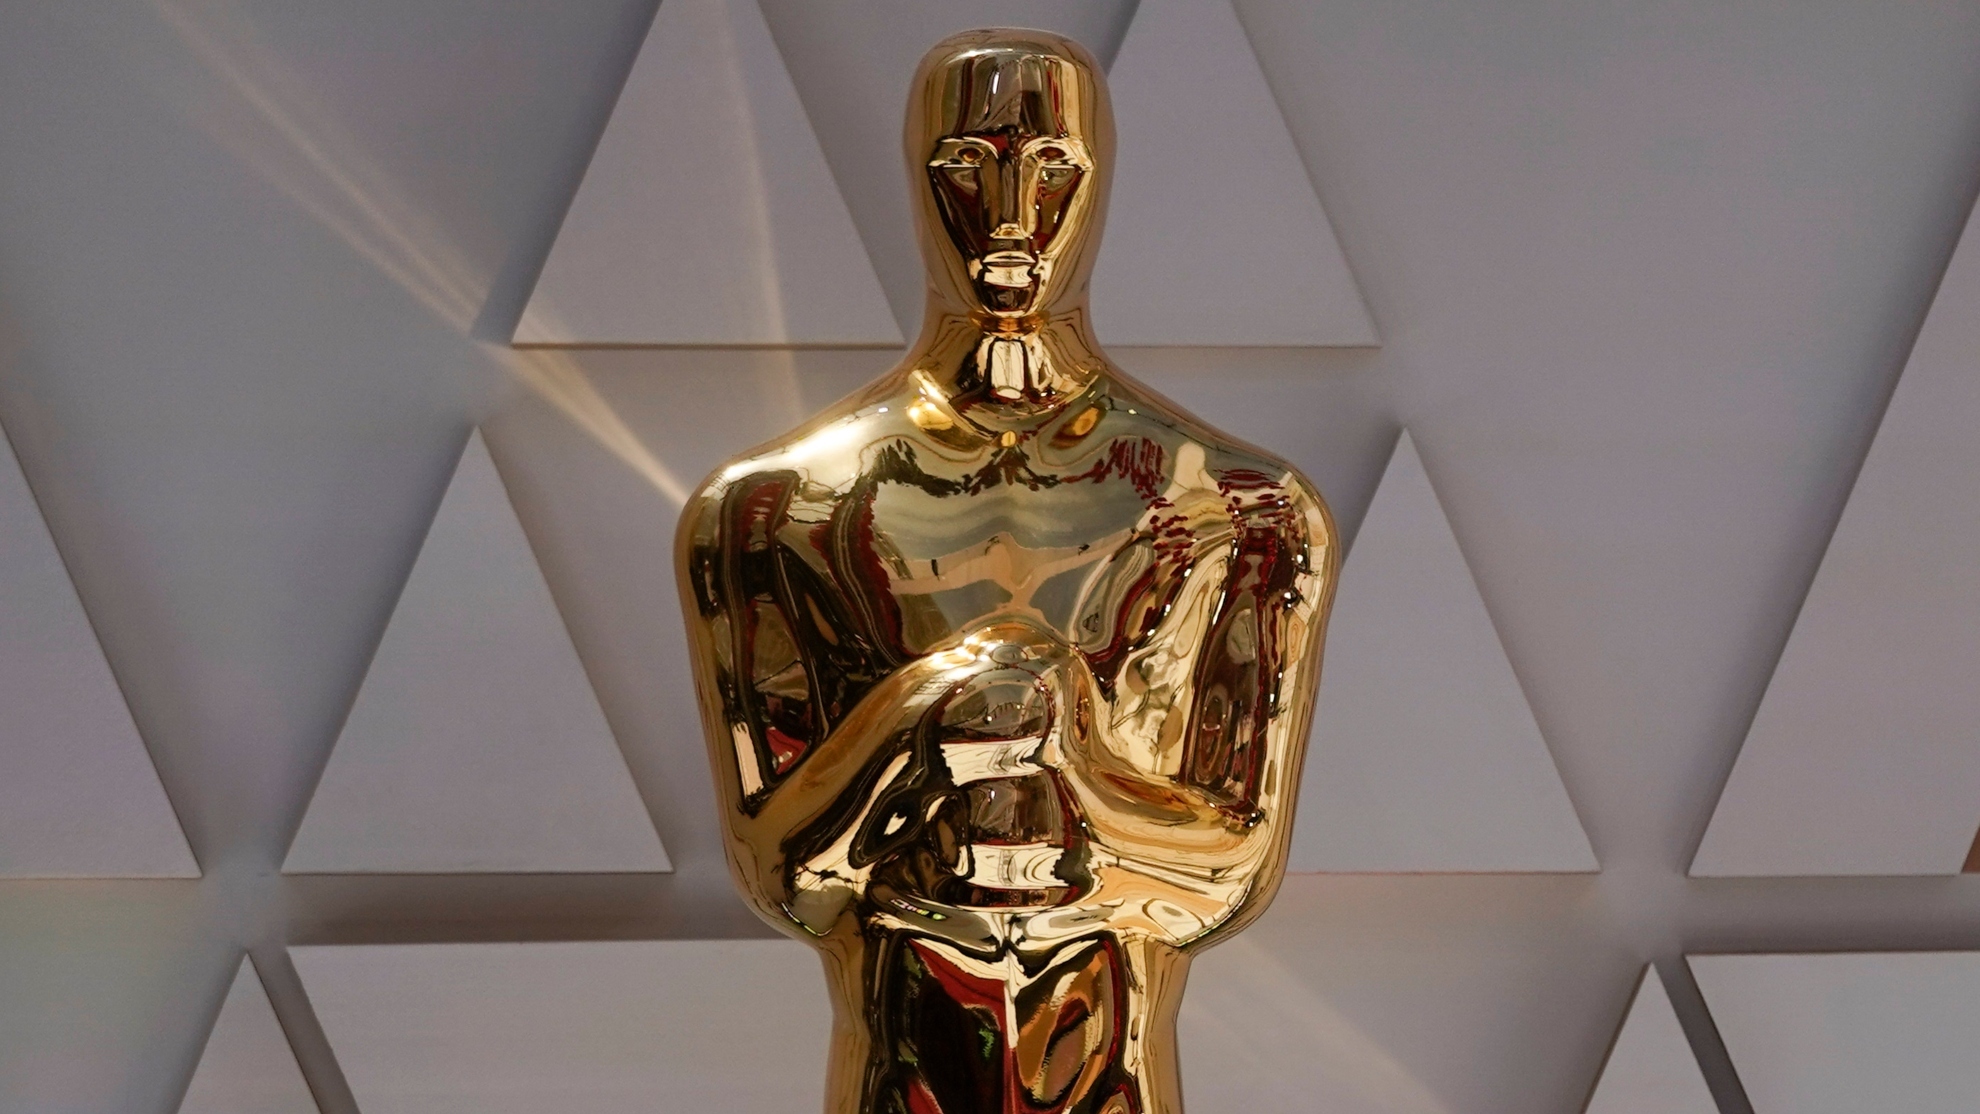 Oscars 2022 Live Updates: The Red Carpet has started! Watch live here! |  Marca